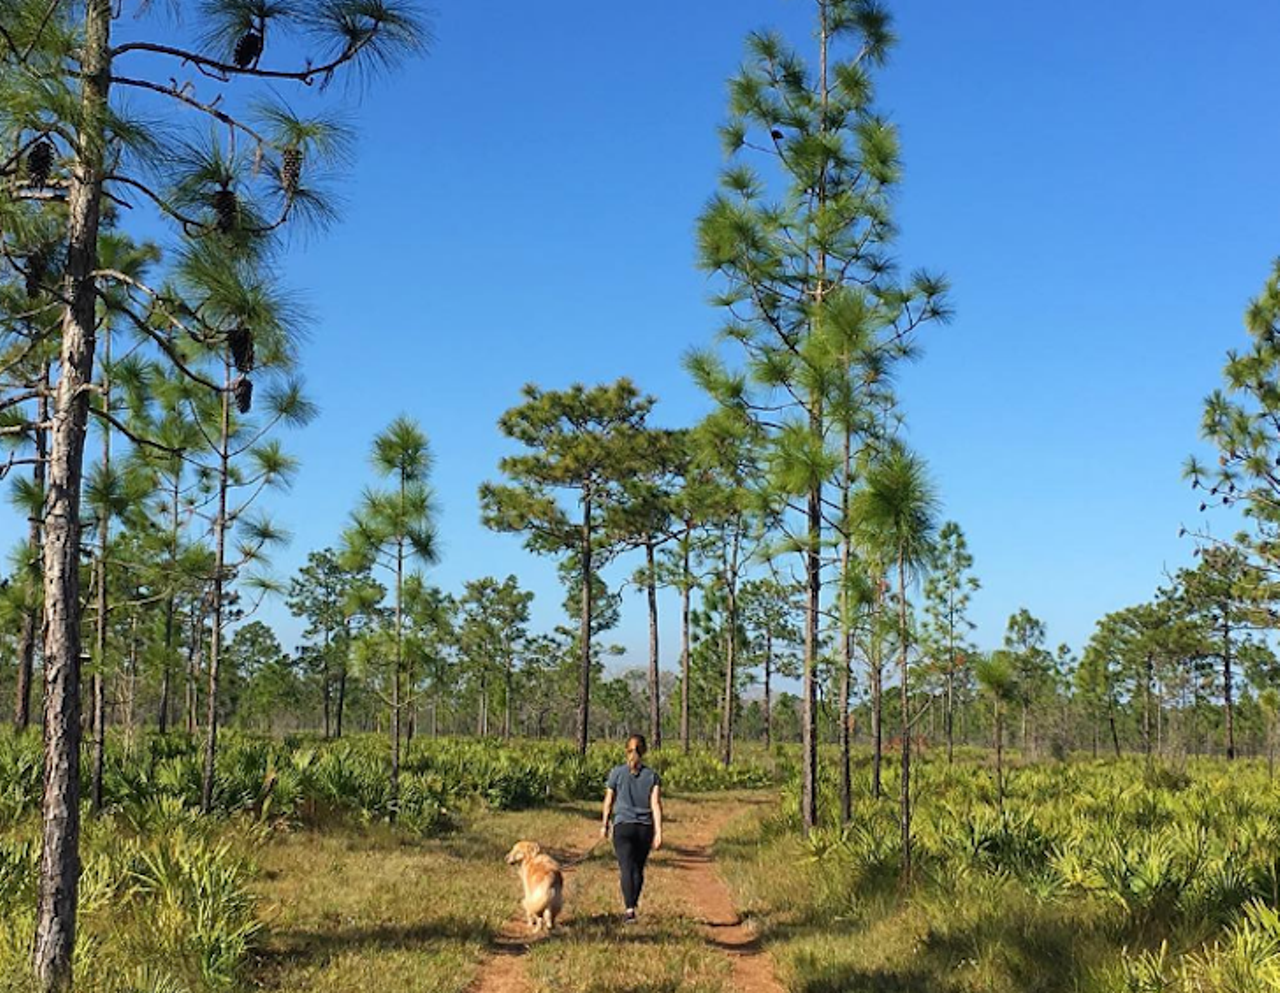 Hal Scott Preserve
4500 Dallas Blvd., Orlando, FL 32833
You&#146;ll probably spot some planes overhead on this vast prairie land located right outside Orlando International Airport. Jus don&#146;t let the jets overhead distract you from exploring 5-mile flat path. 
Photo via briellecerep/Instagram